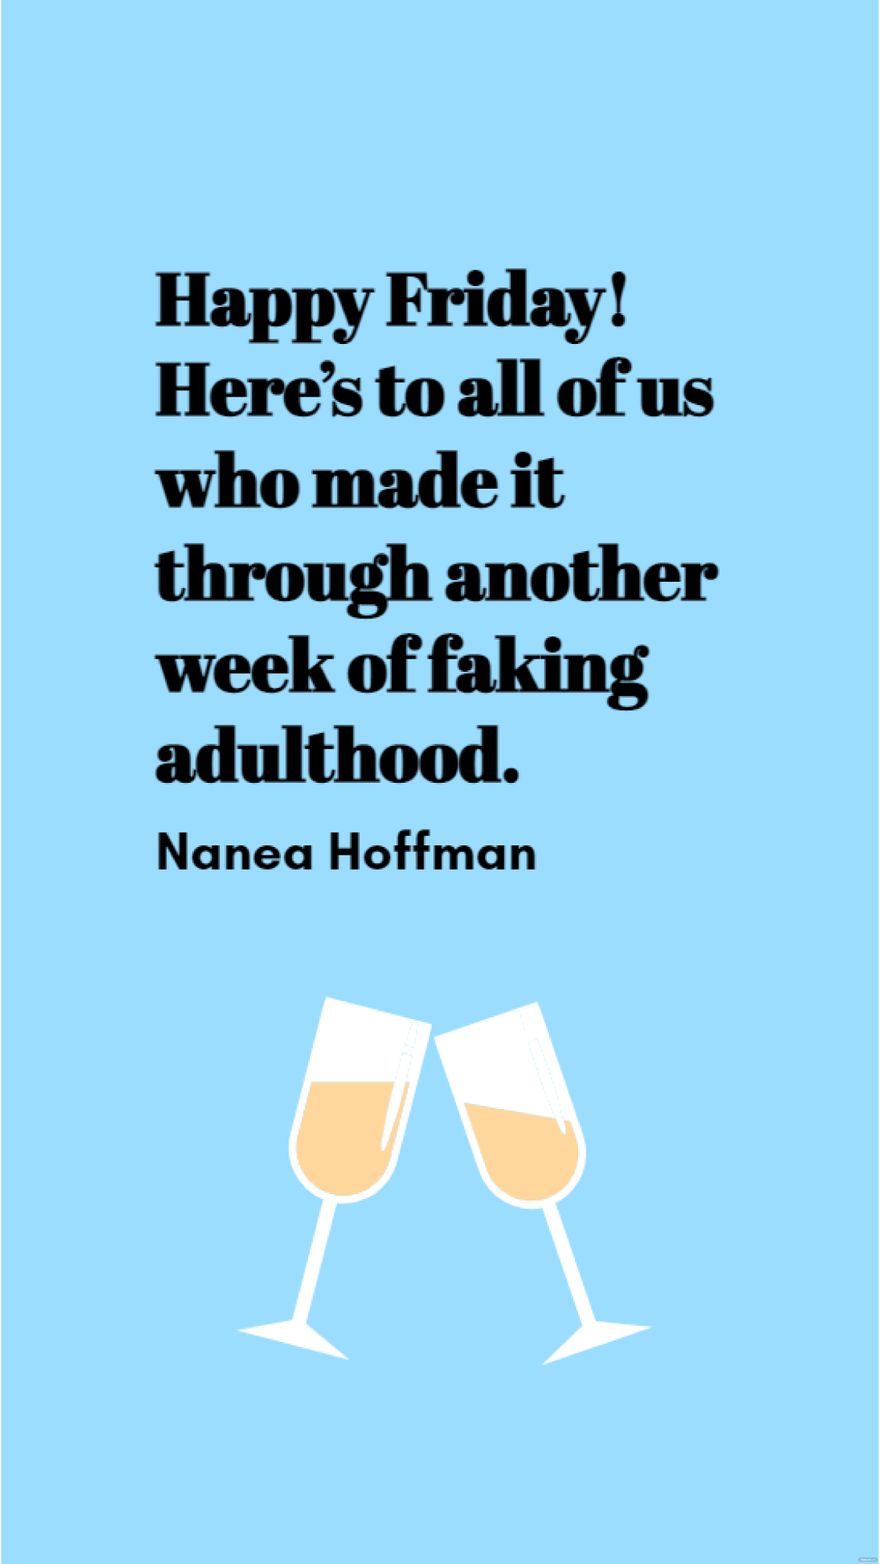 Free Nanea Hoffman - Happy Friday! Here’s to all of us who made it through another week of faking adulthood.